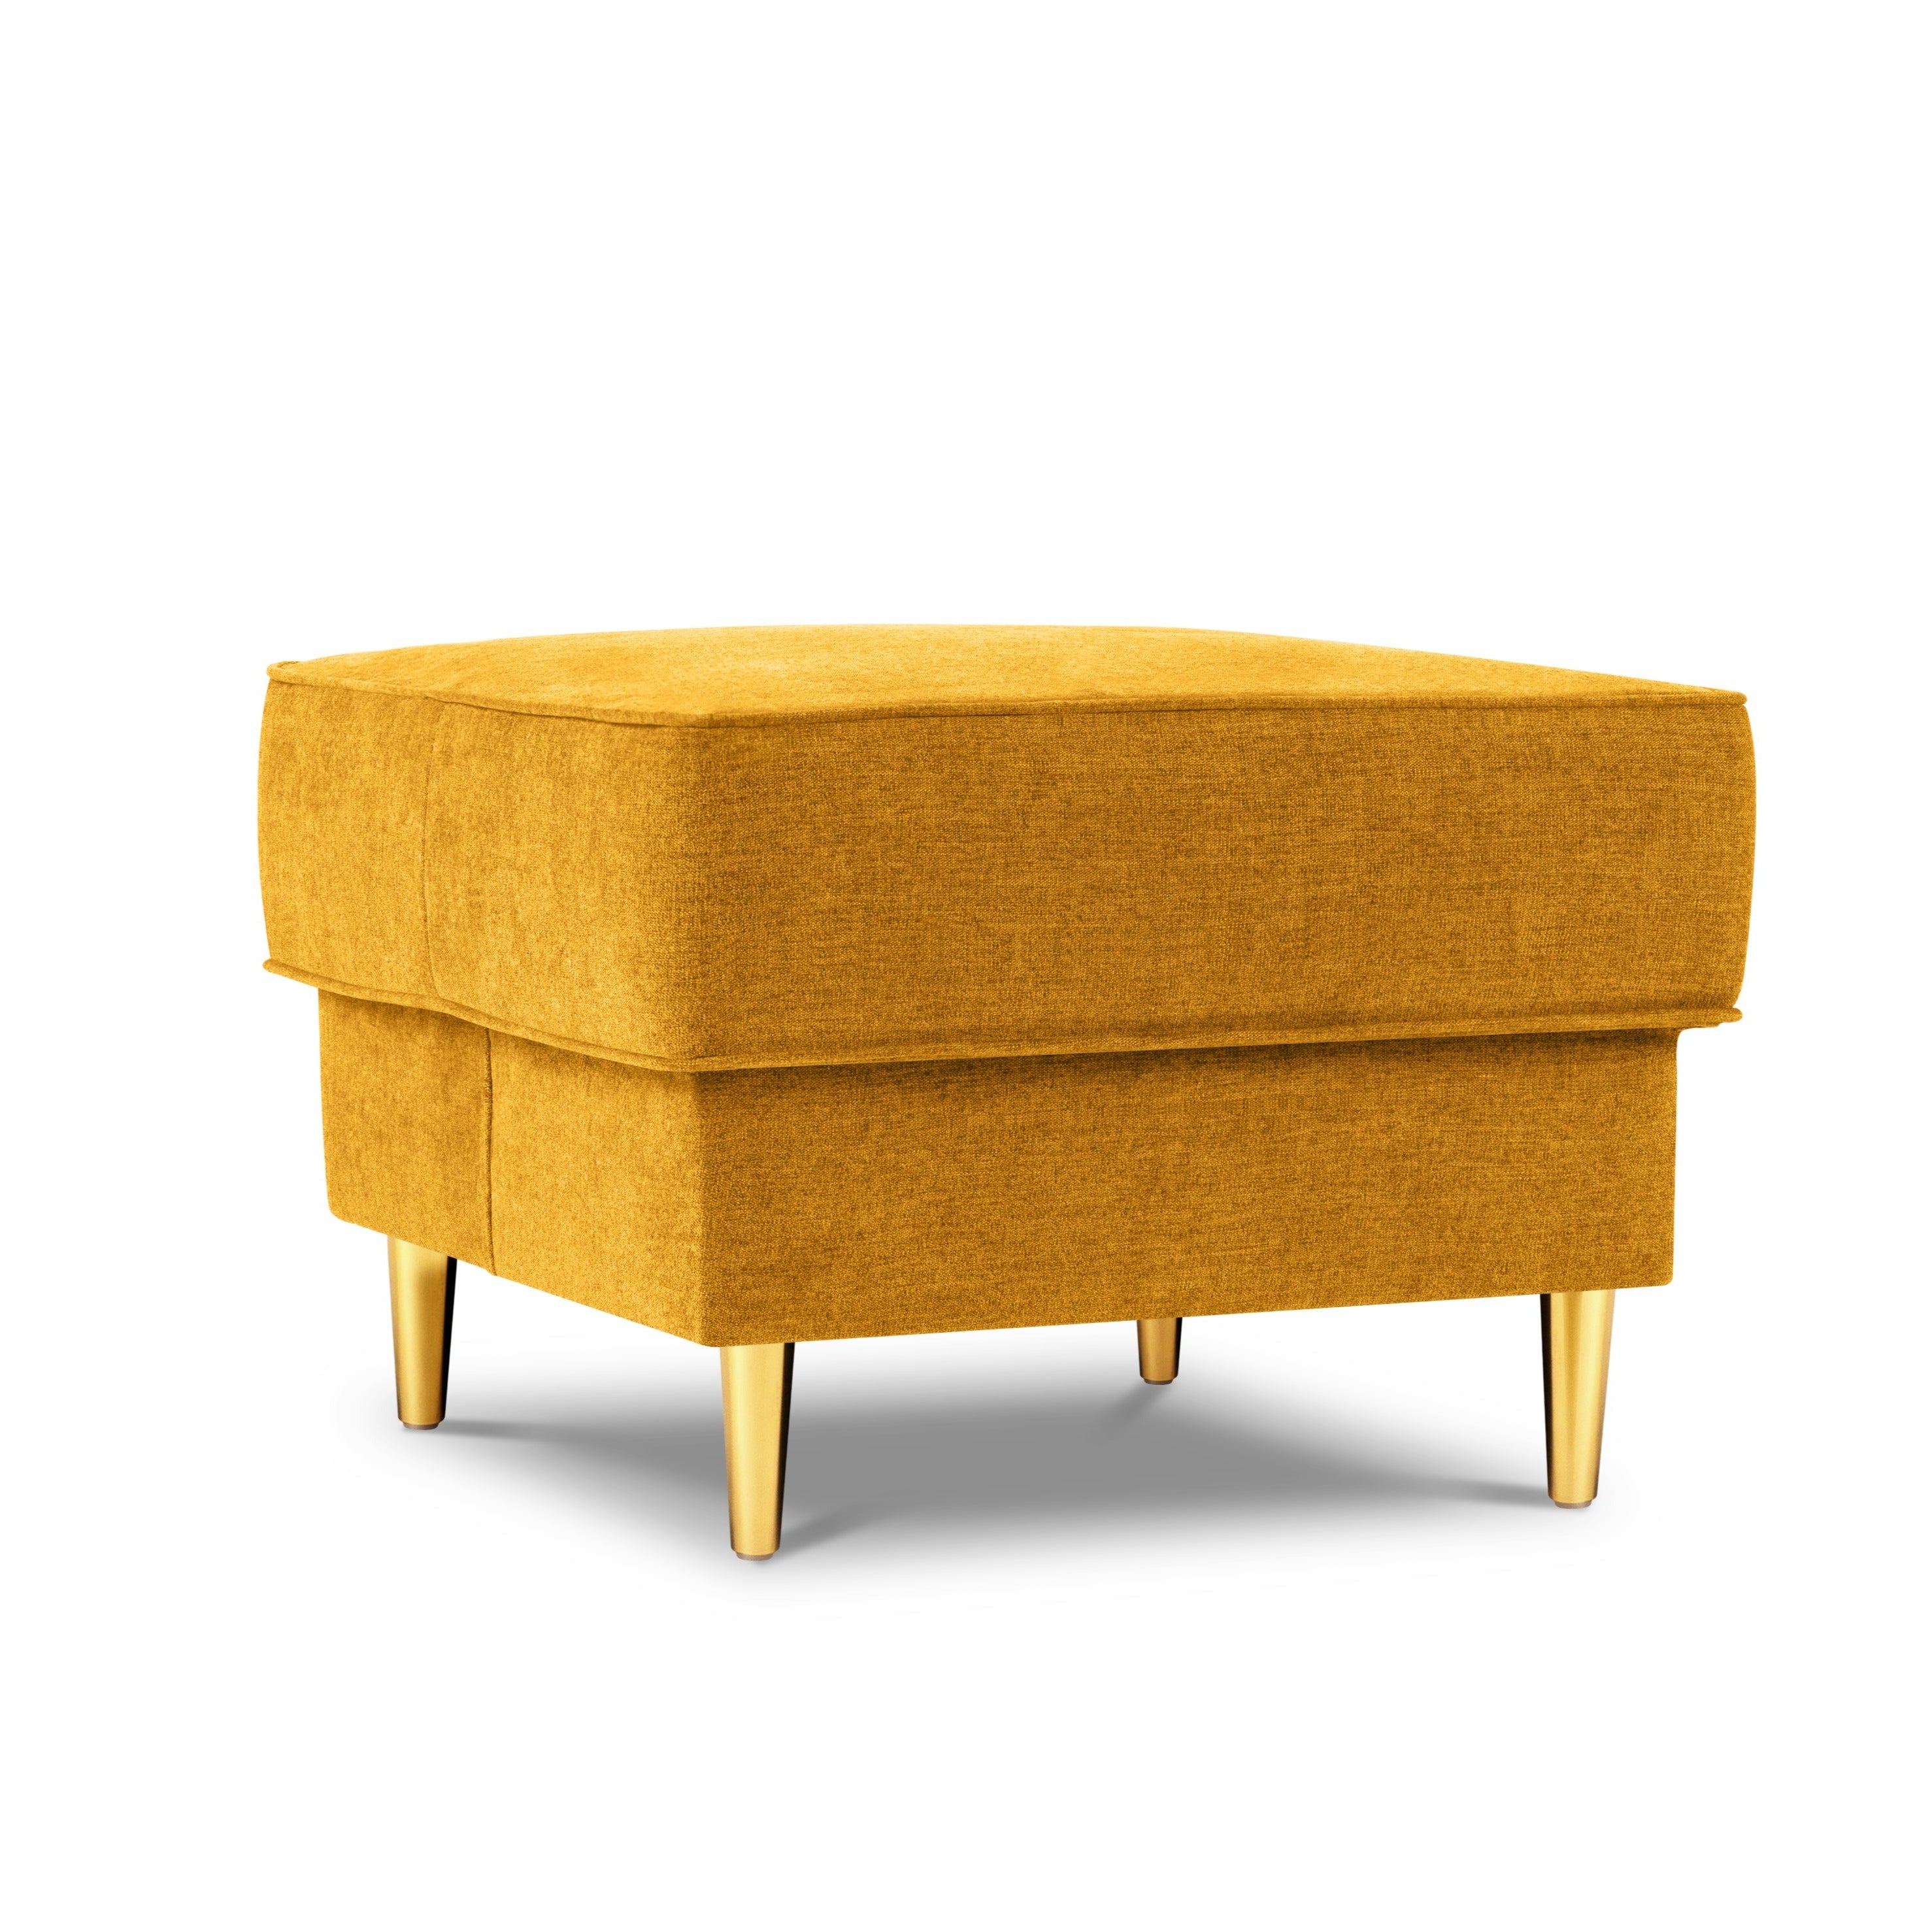 Yellow pouf with a golden base